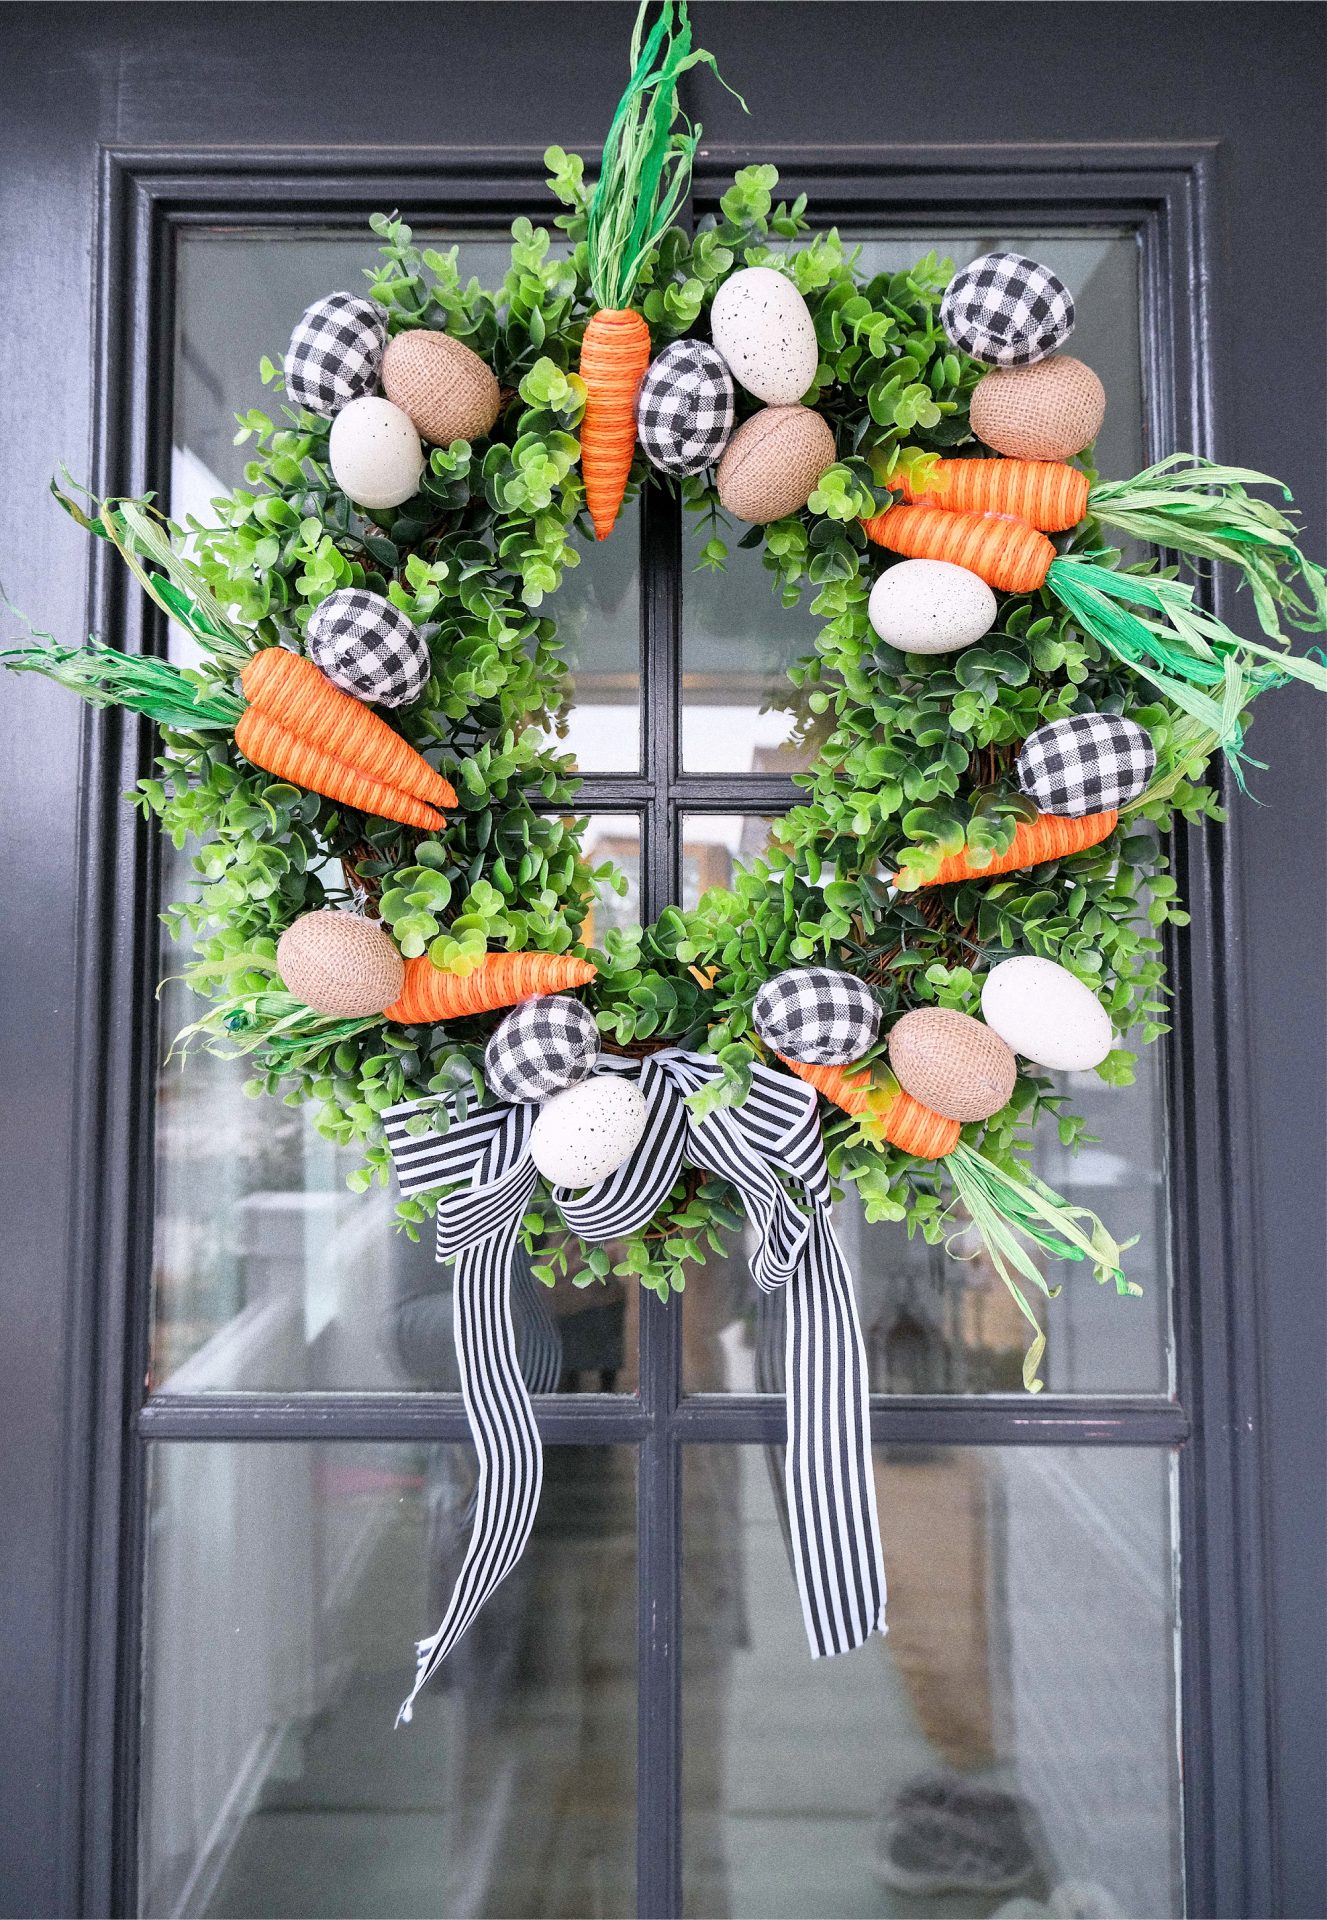 Wreath, carrot wreath, seasonal, spring wreath, diy, eggs, easter, home decor, front porch, hobby lobby, minimal, inexpensive, ghingam, carrot decor, spring diy, home projects